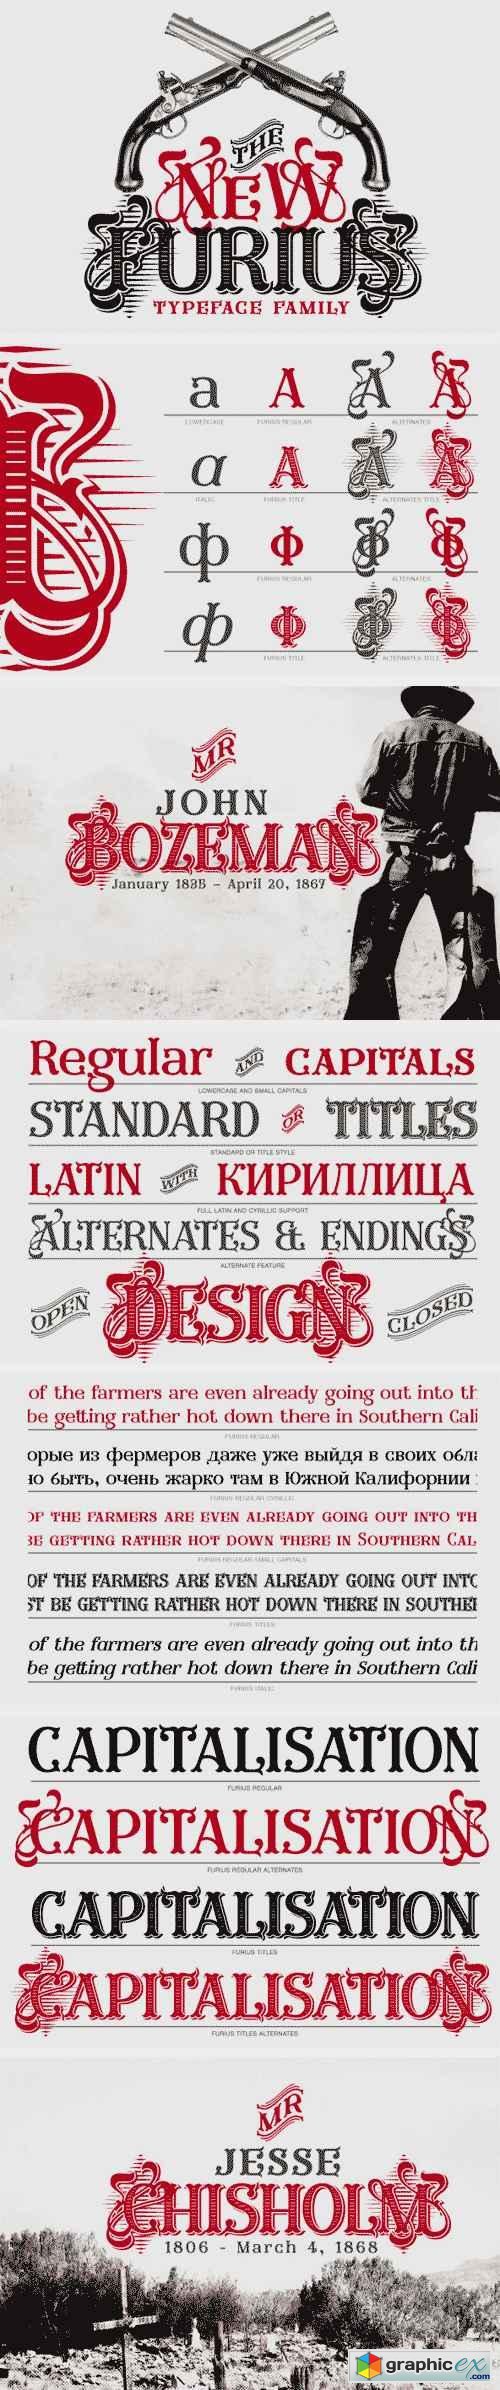 Furius Font Family - 4 Fonts for $79